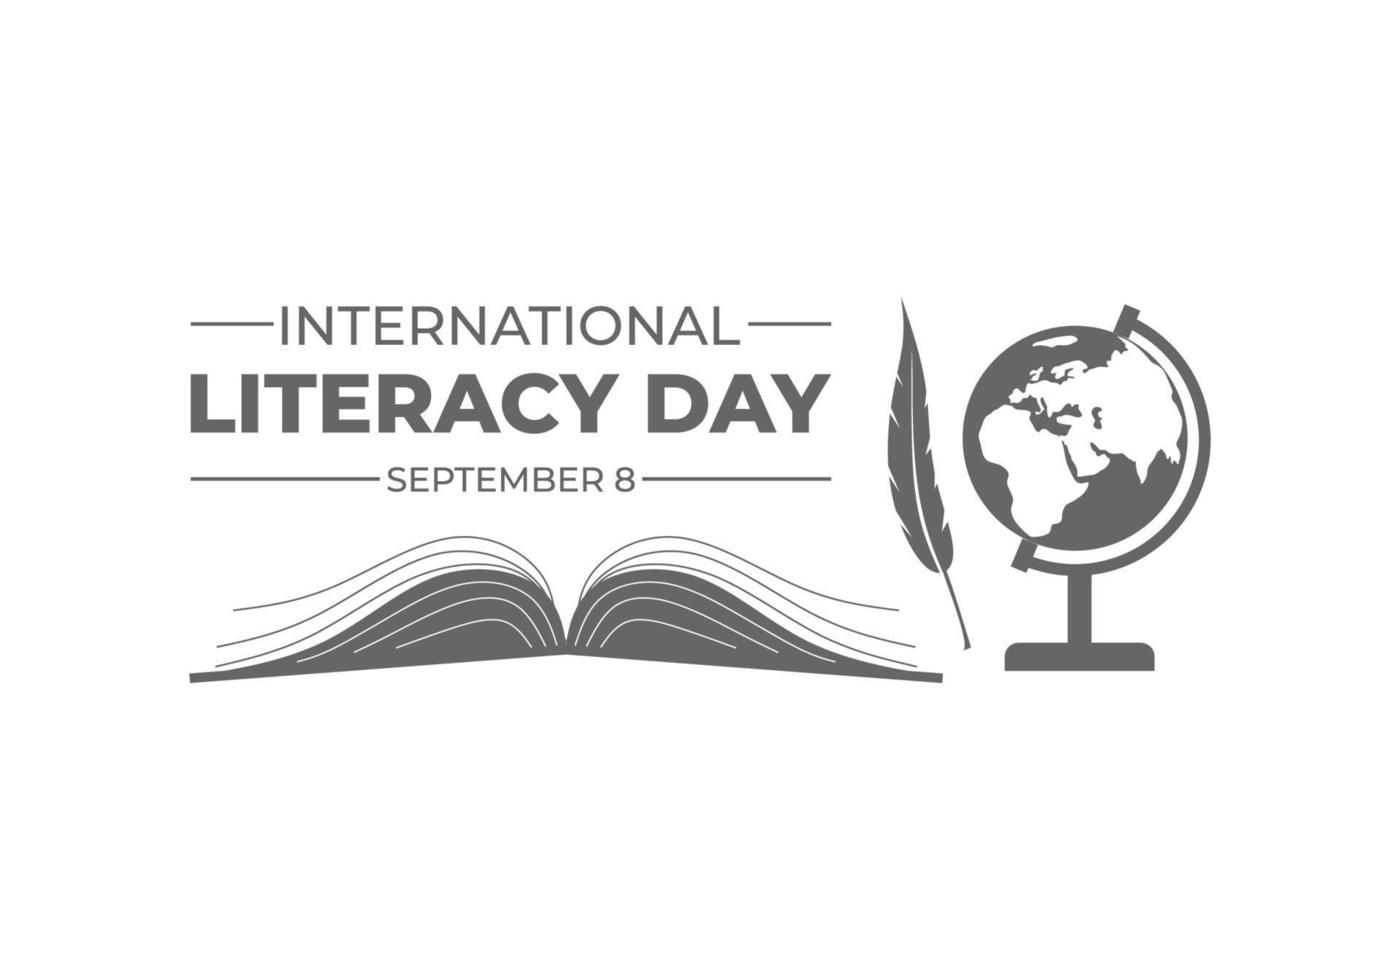 International literacy day poster with feather, opened book and globe vector